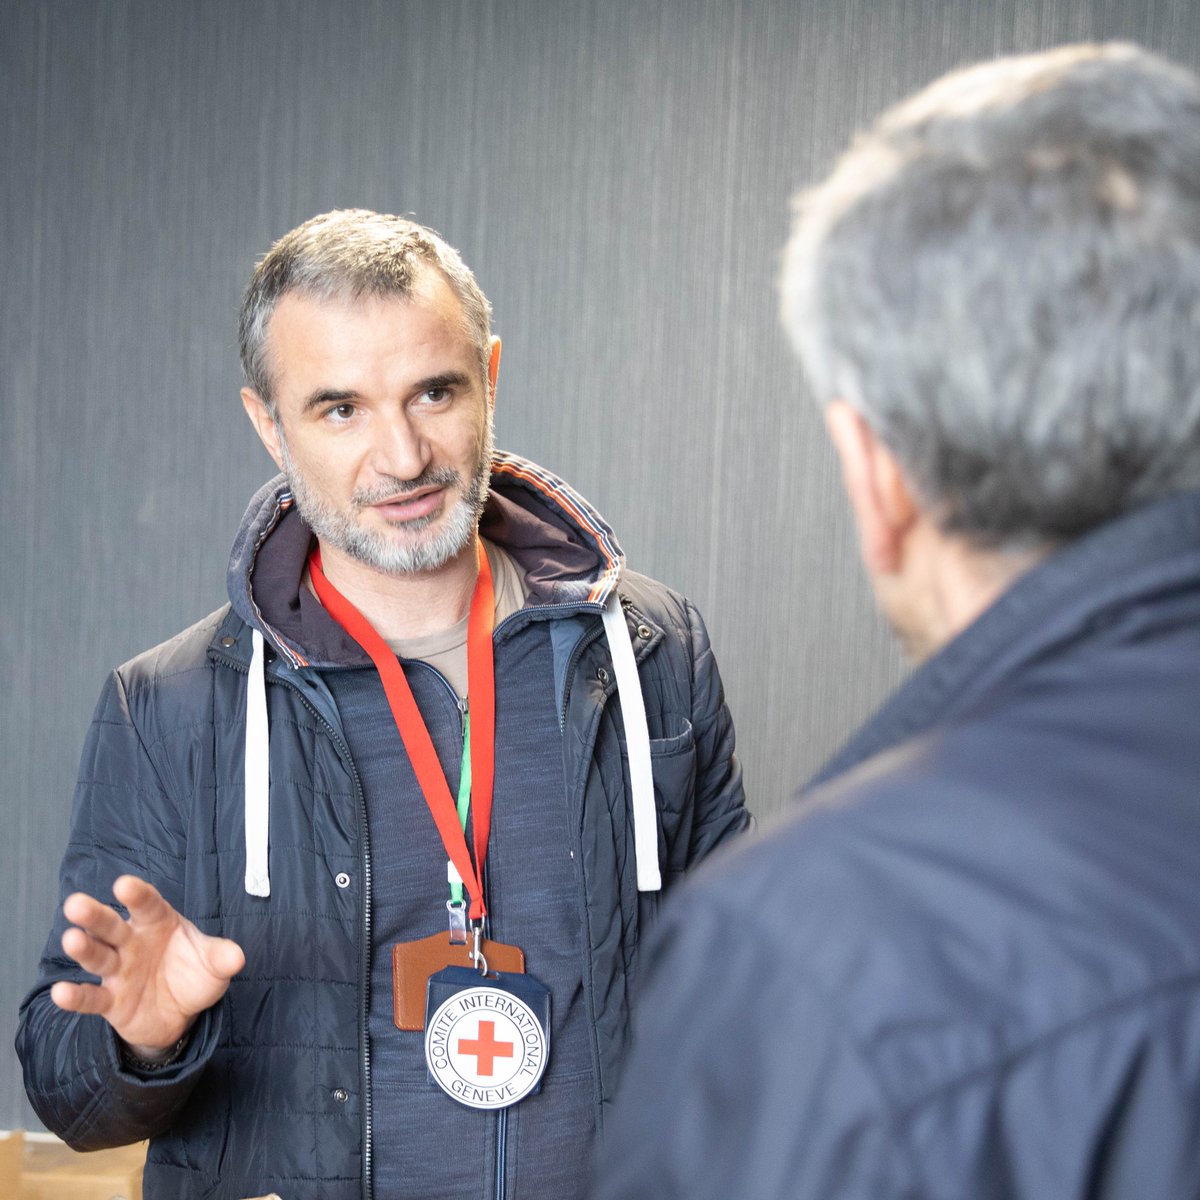 In April, the #ICRC representatives again visited all the Armenian detainees notified by the Azerbaijani authorities. The detainees were met in private and were given a possibility to exchange family news.